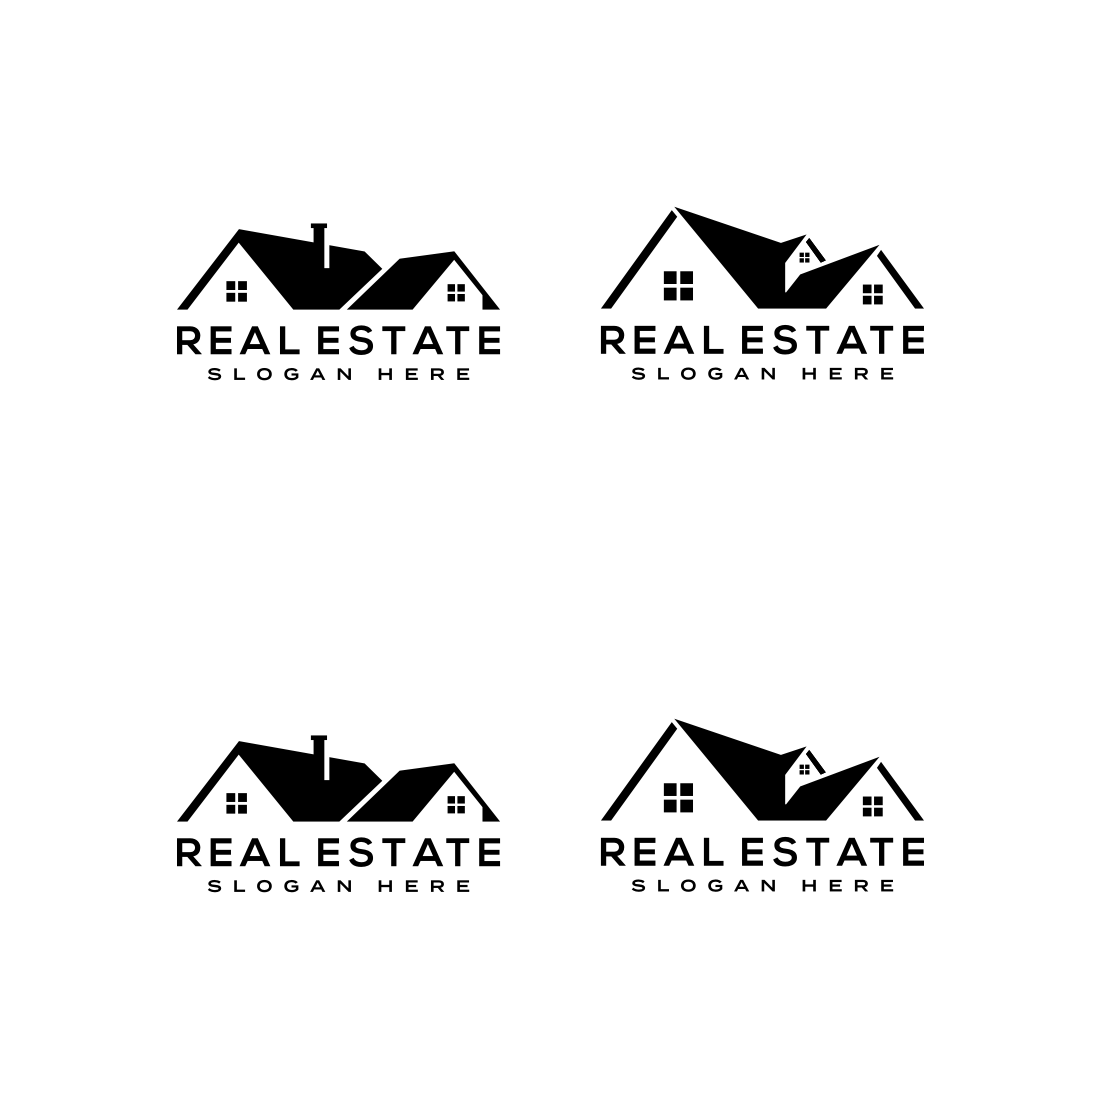 Home Real Estate Logo Vector cover image.